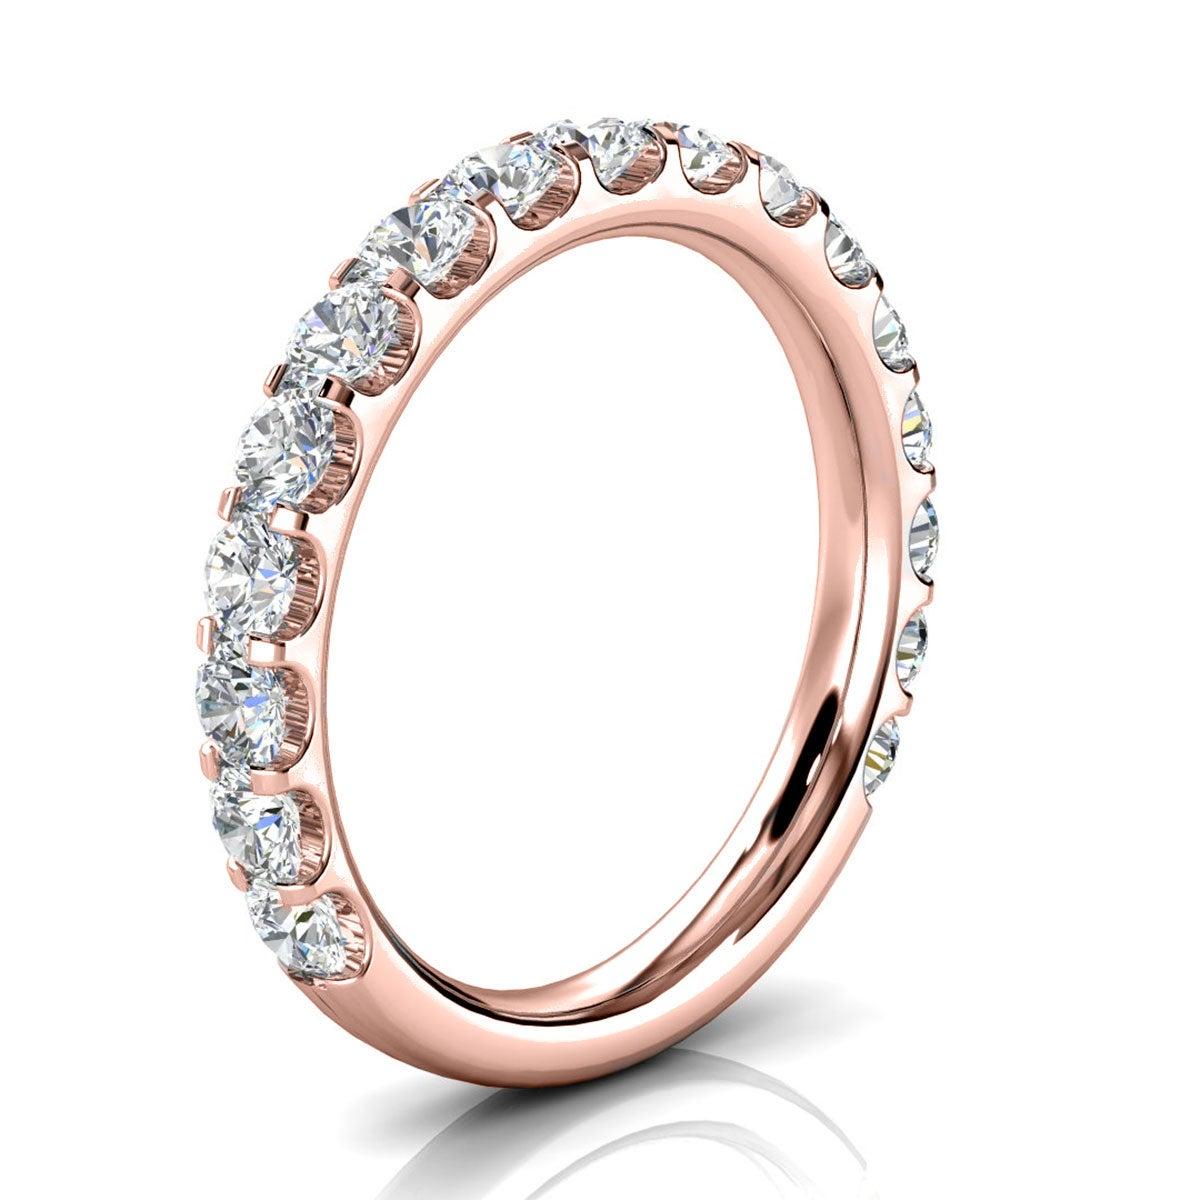 For Sale:  18k Rose Gold Carole Micro-Prong Diamond Ring '1 Ct. Tw' 2